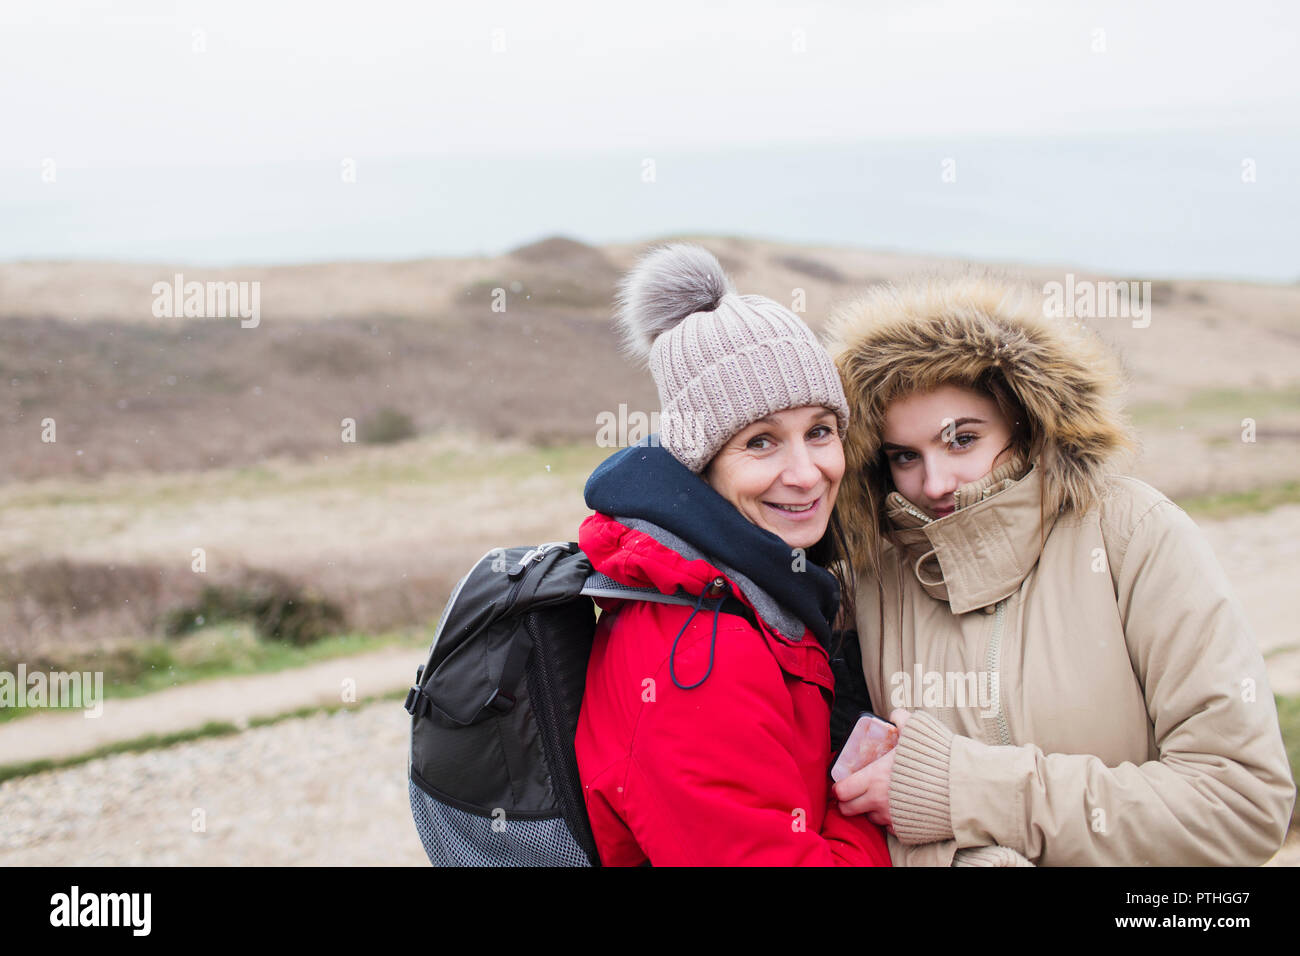 Portrait smiling mother and daughter in warm clothing Stock Photo